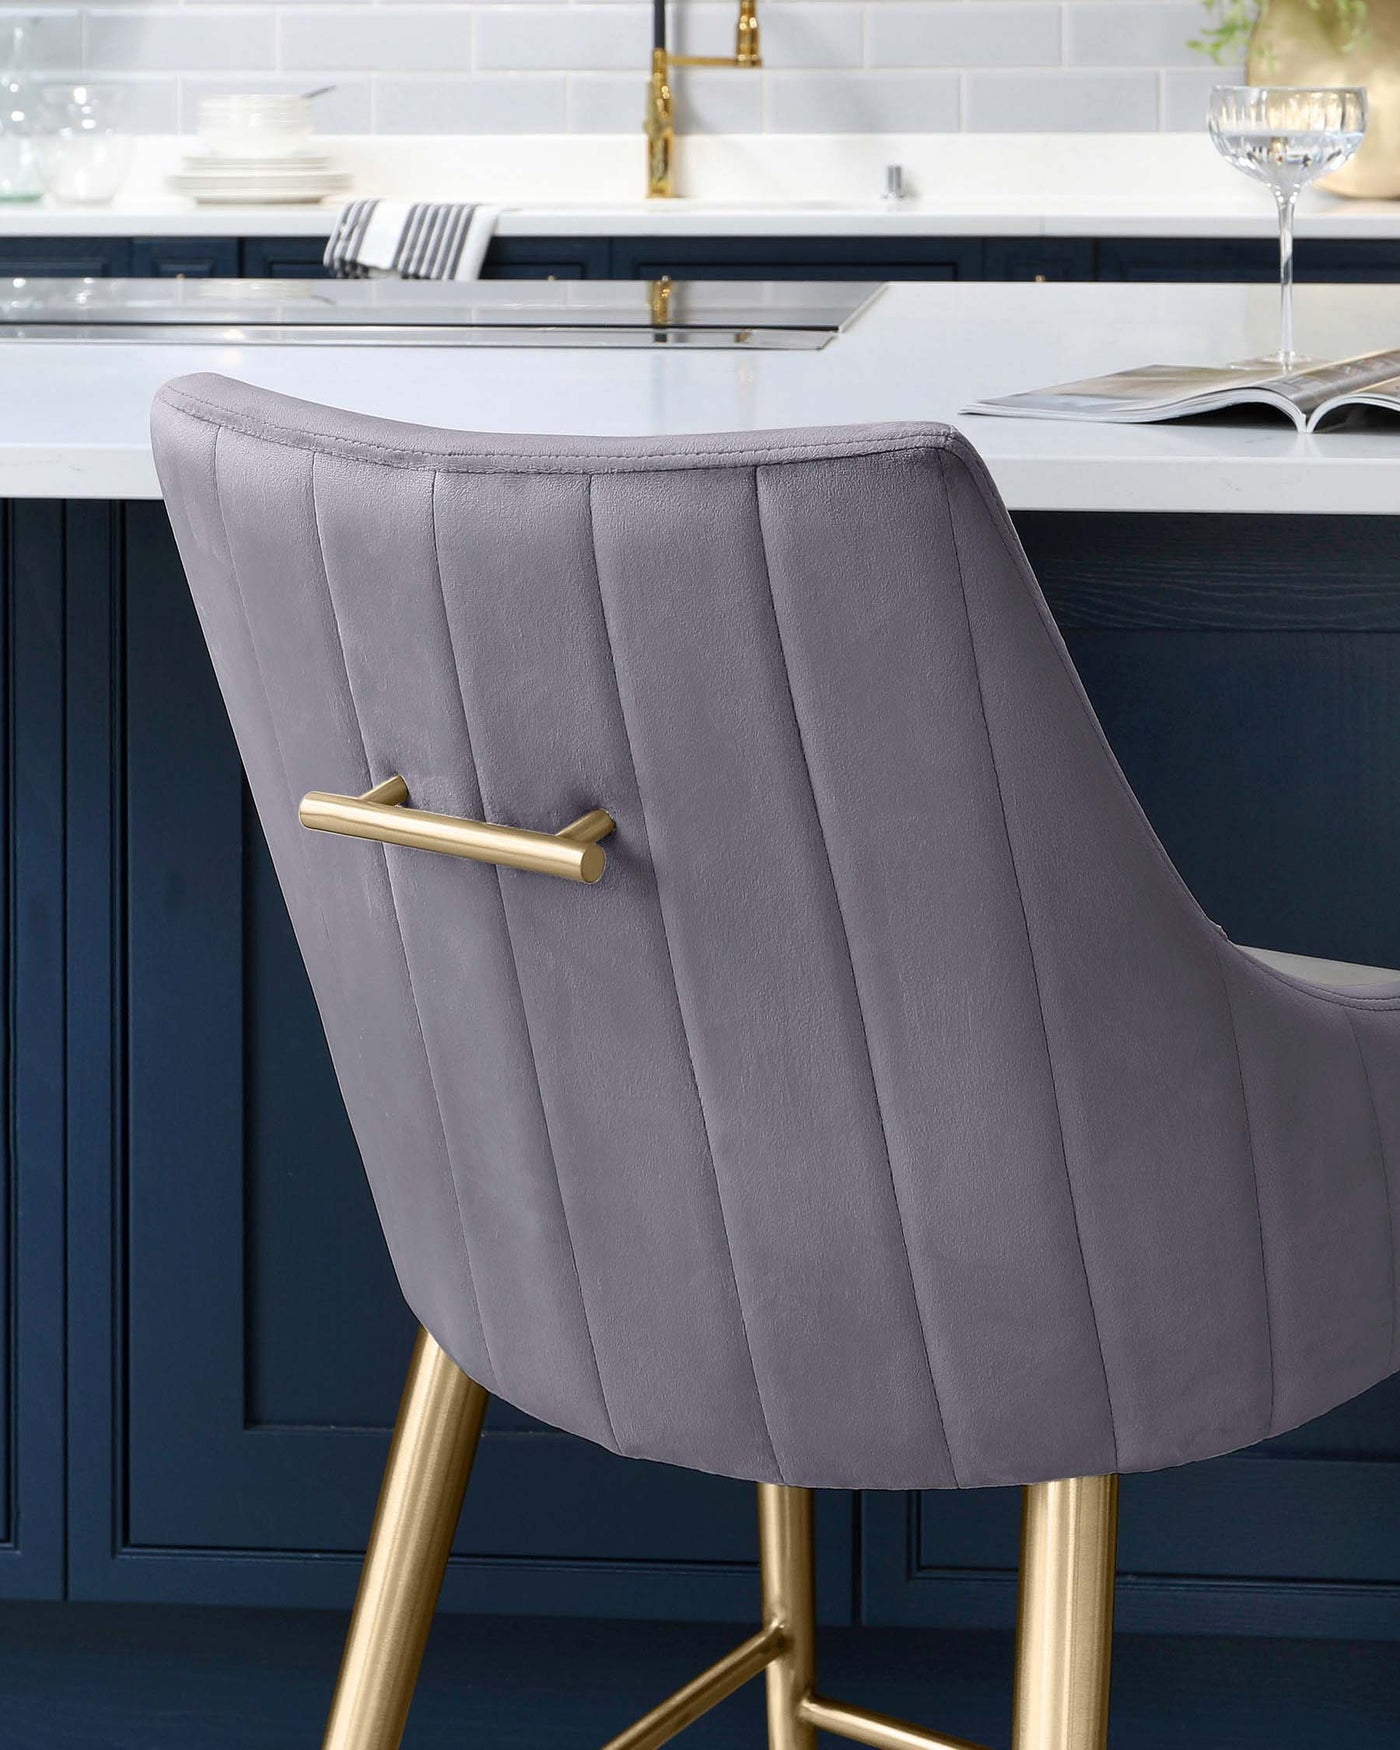 Elegant modern bar stool with a curved, channel-tufted backrest in a soft lavender shade, featuring sleek golden legs that taper to a point and a matching golden footrest.